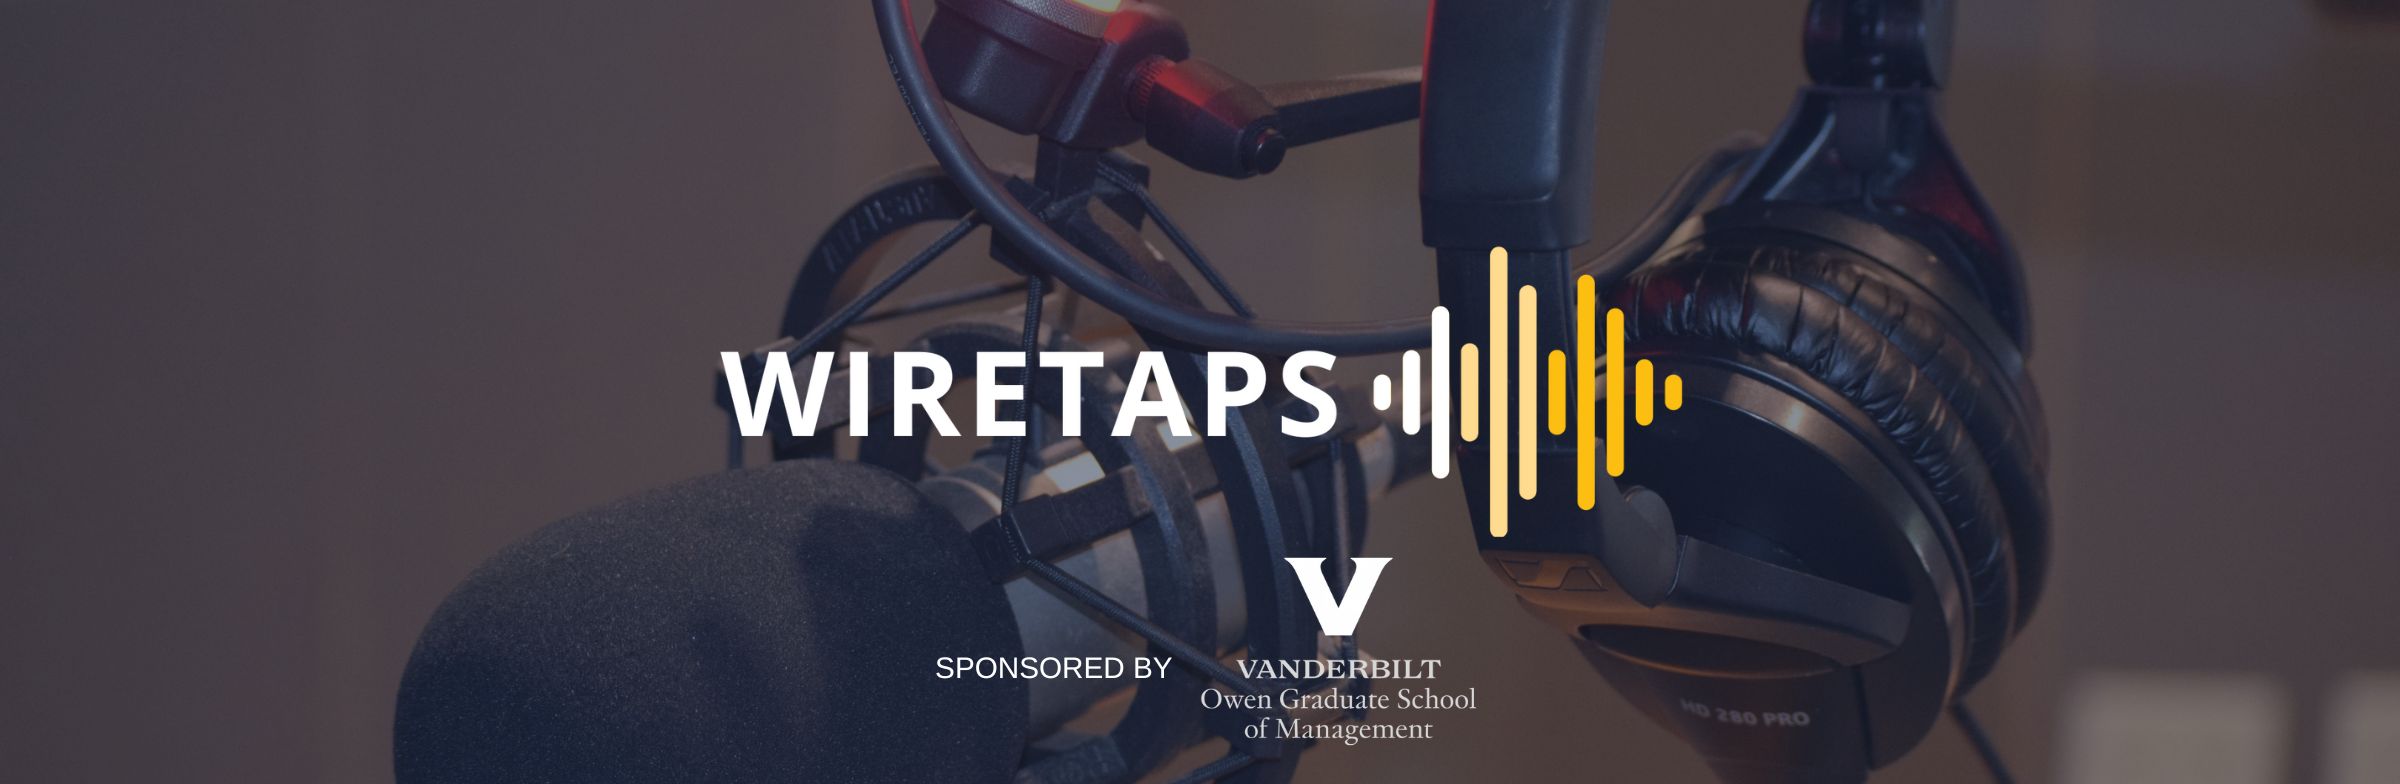 Episode 340 of Clear Admit's MBA Admissions Wire Taps Podcast